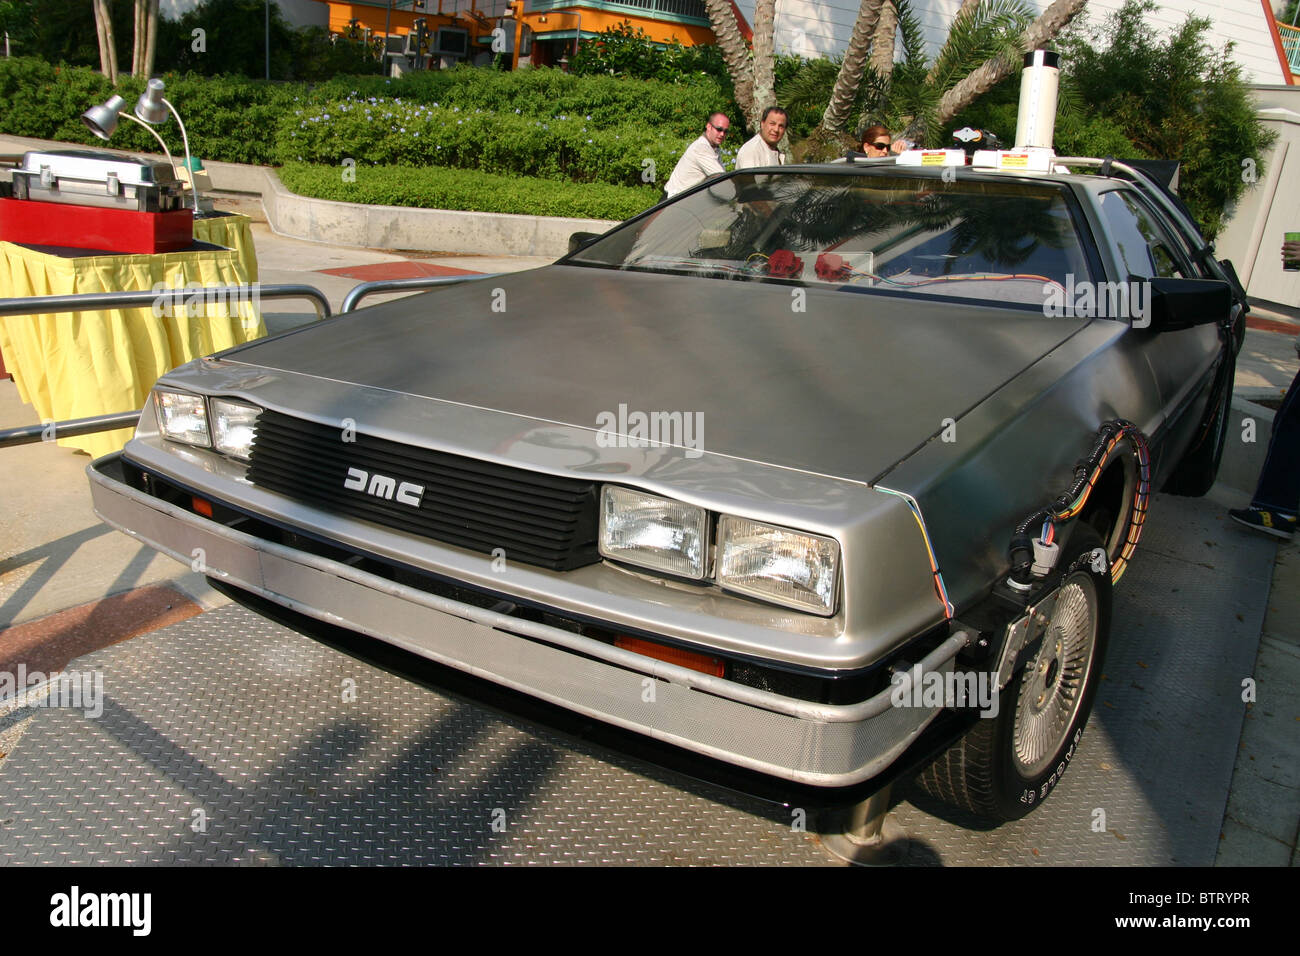 DeLorean car featured in the Back to the Future trilogy at Universal studios. Stock Photo